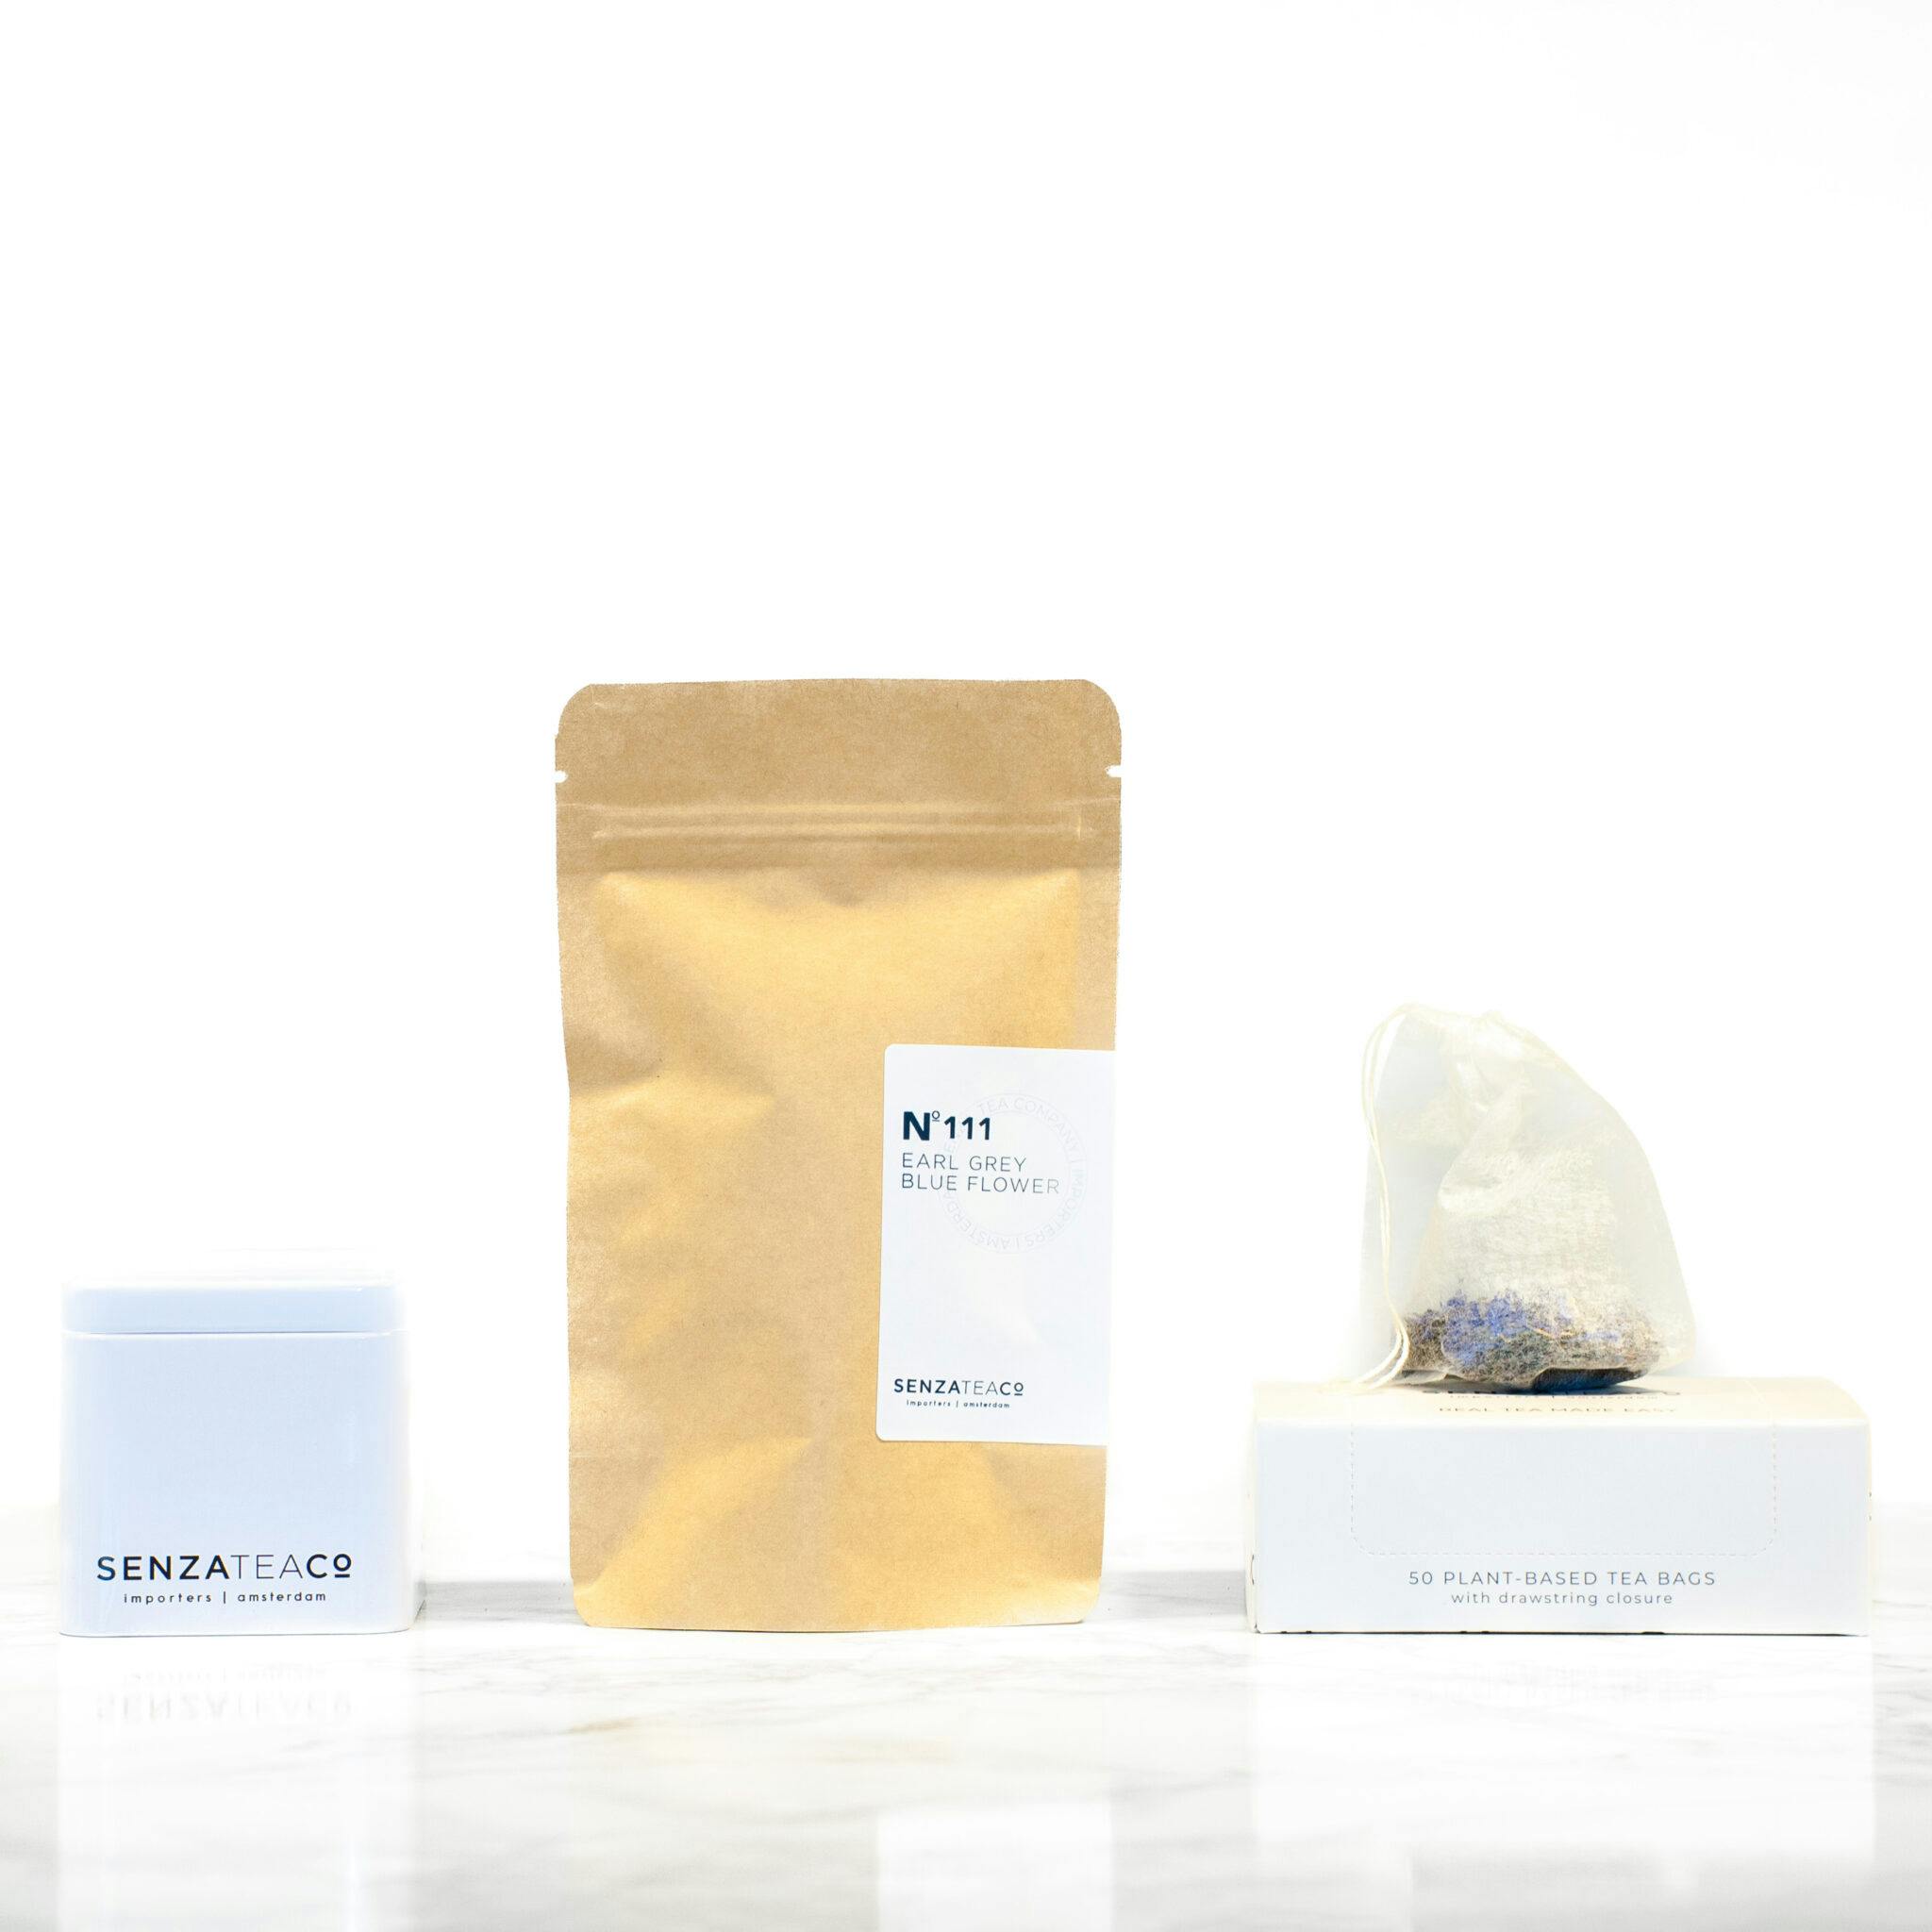 Storage can for tea leaves, bag with tea leaves and tea filter by Senza Tea